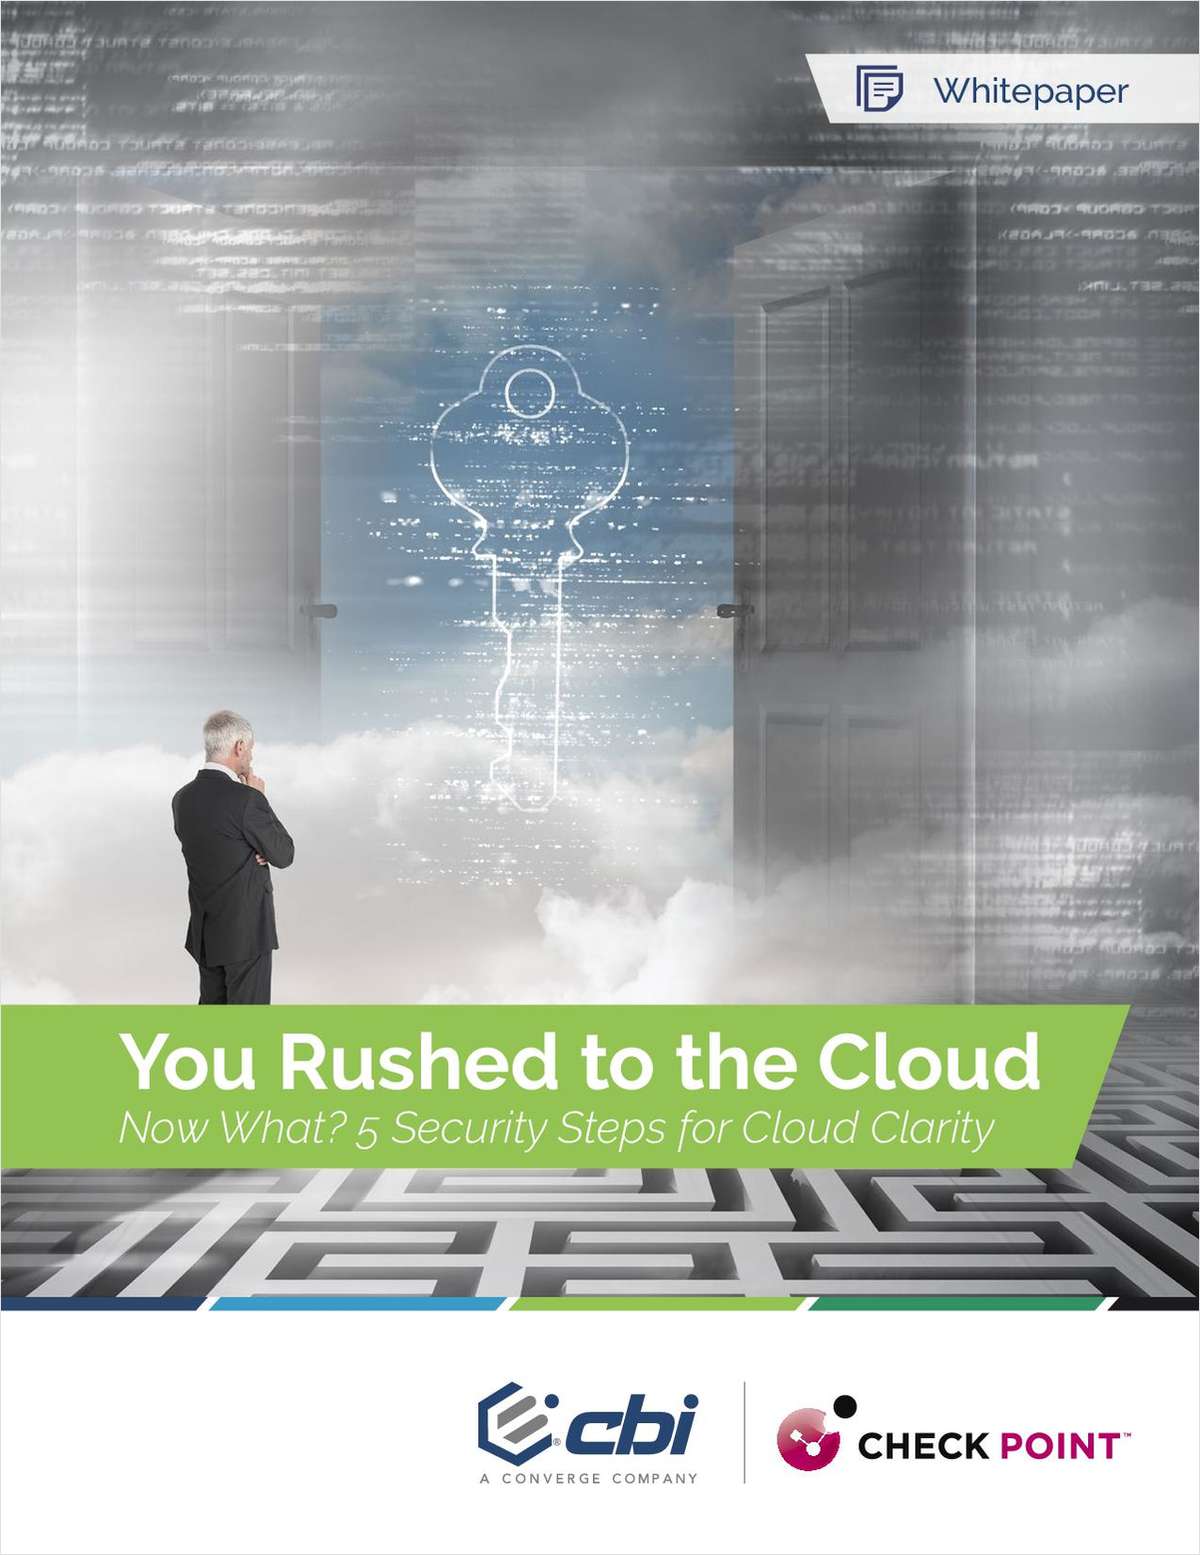 You Rushed to the Cloud. Now What? 5 Security Steps for Cloud Clarity